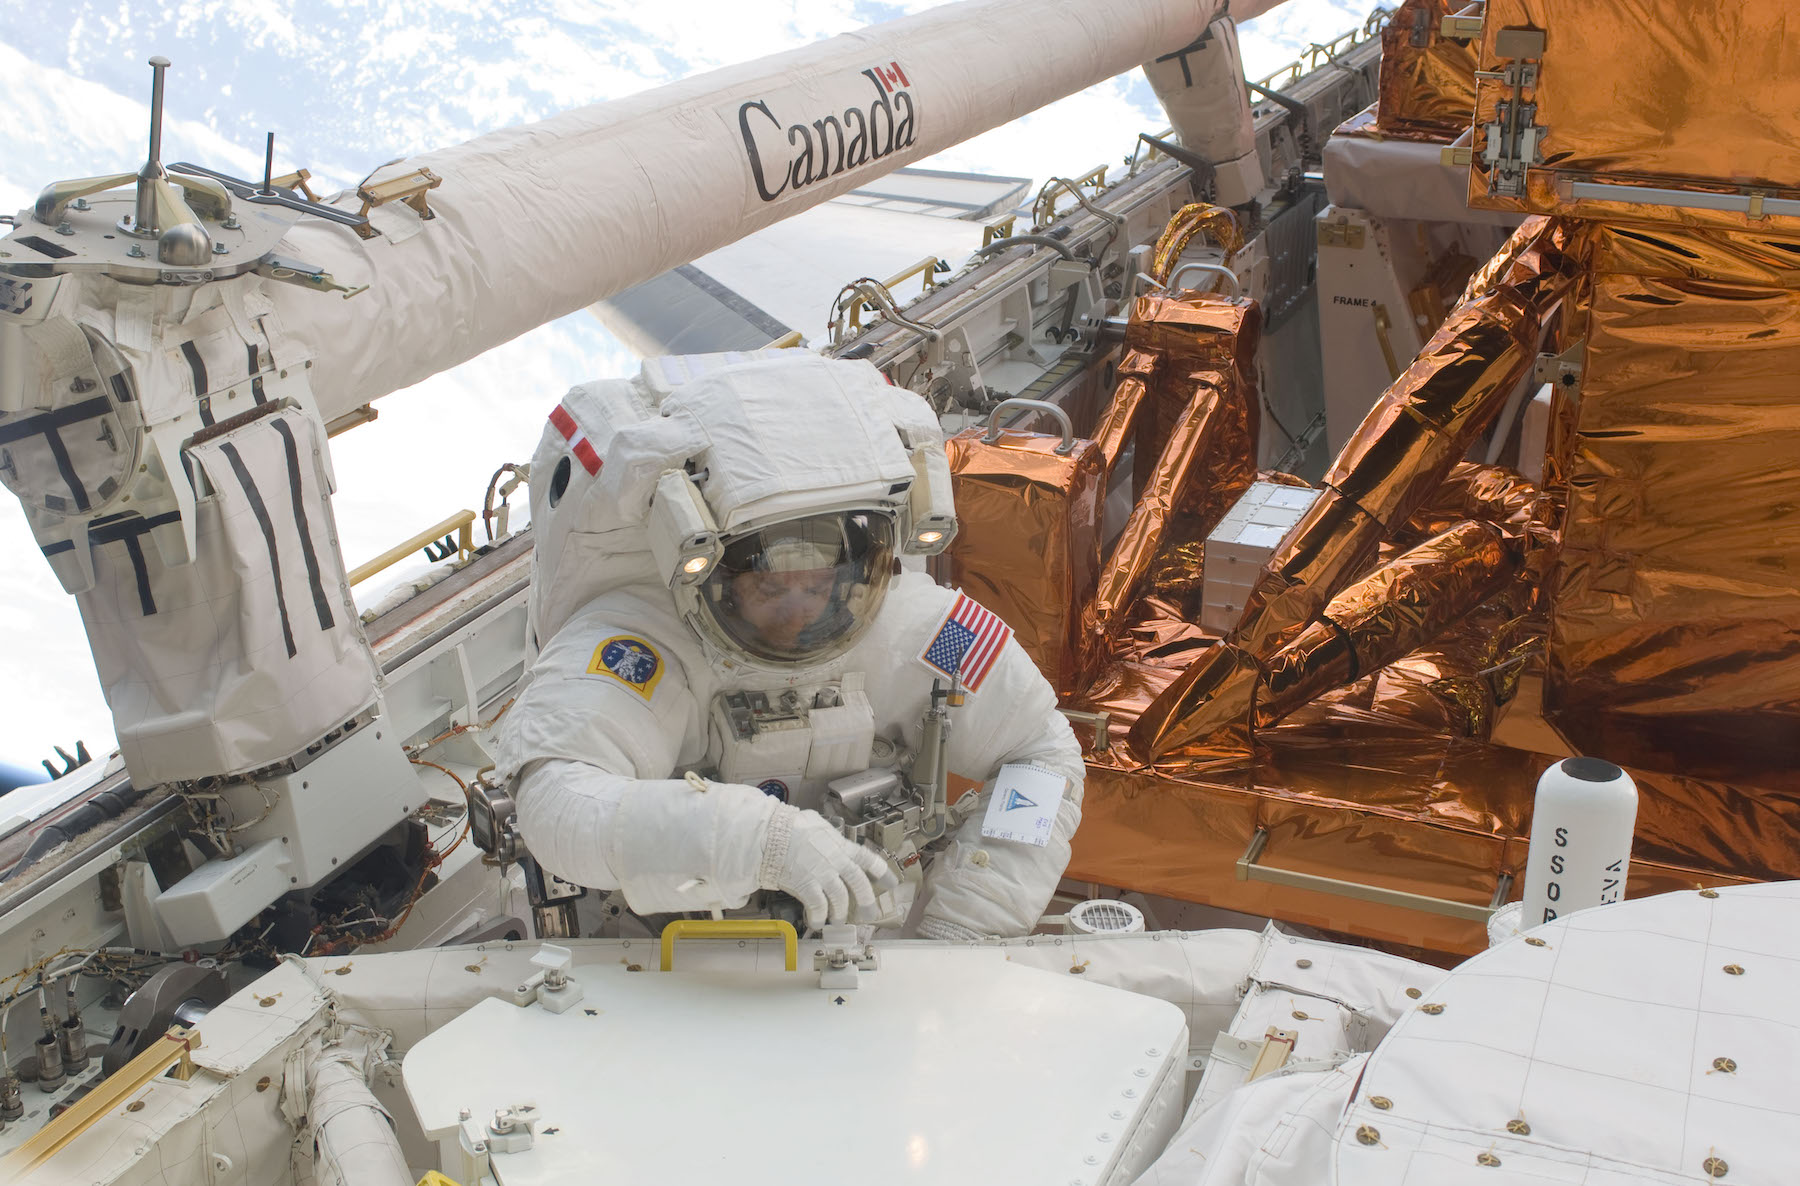 A man in a space suit sits on the roof of a space vessel